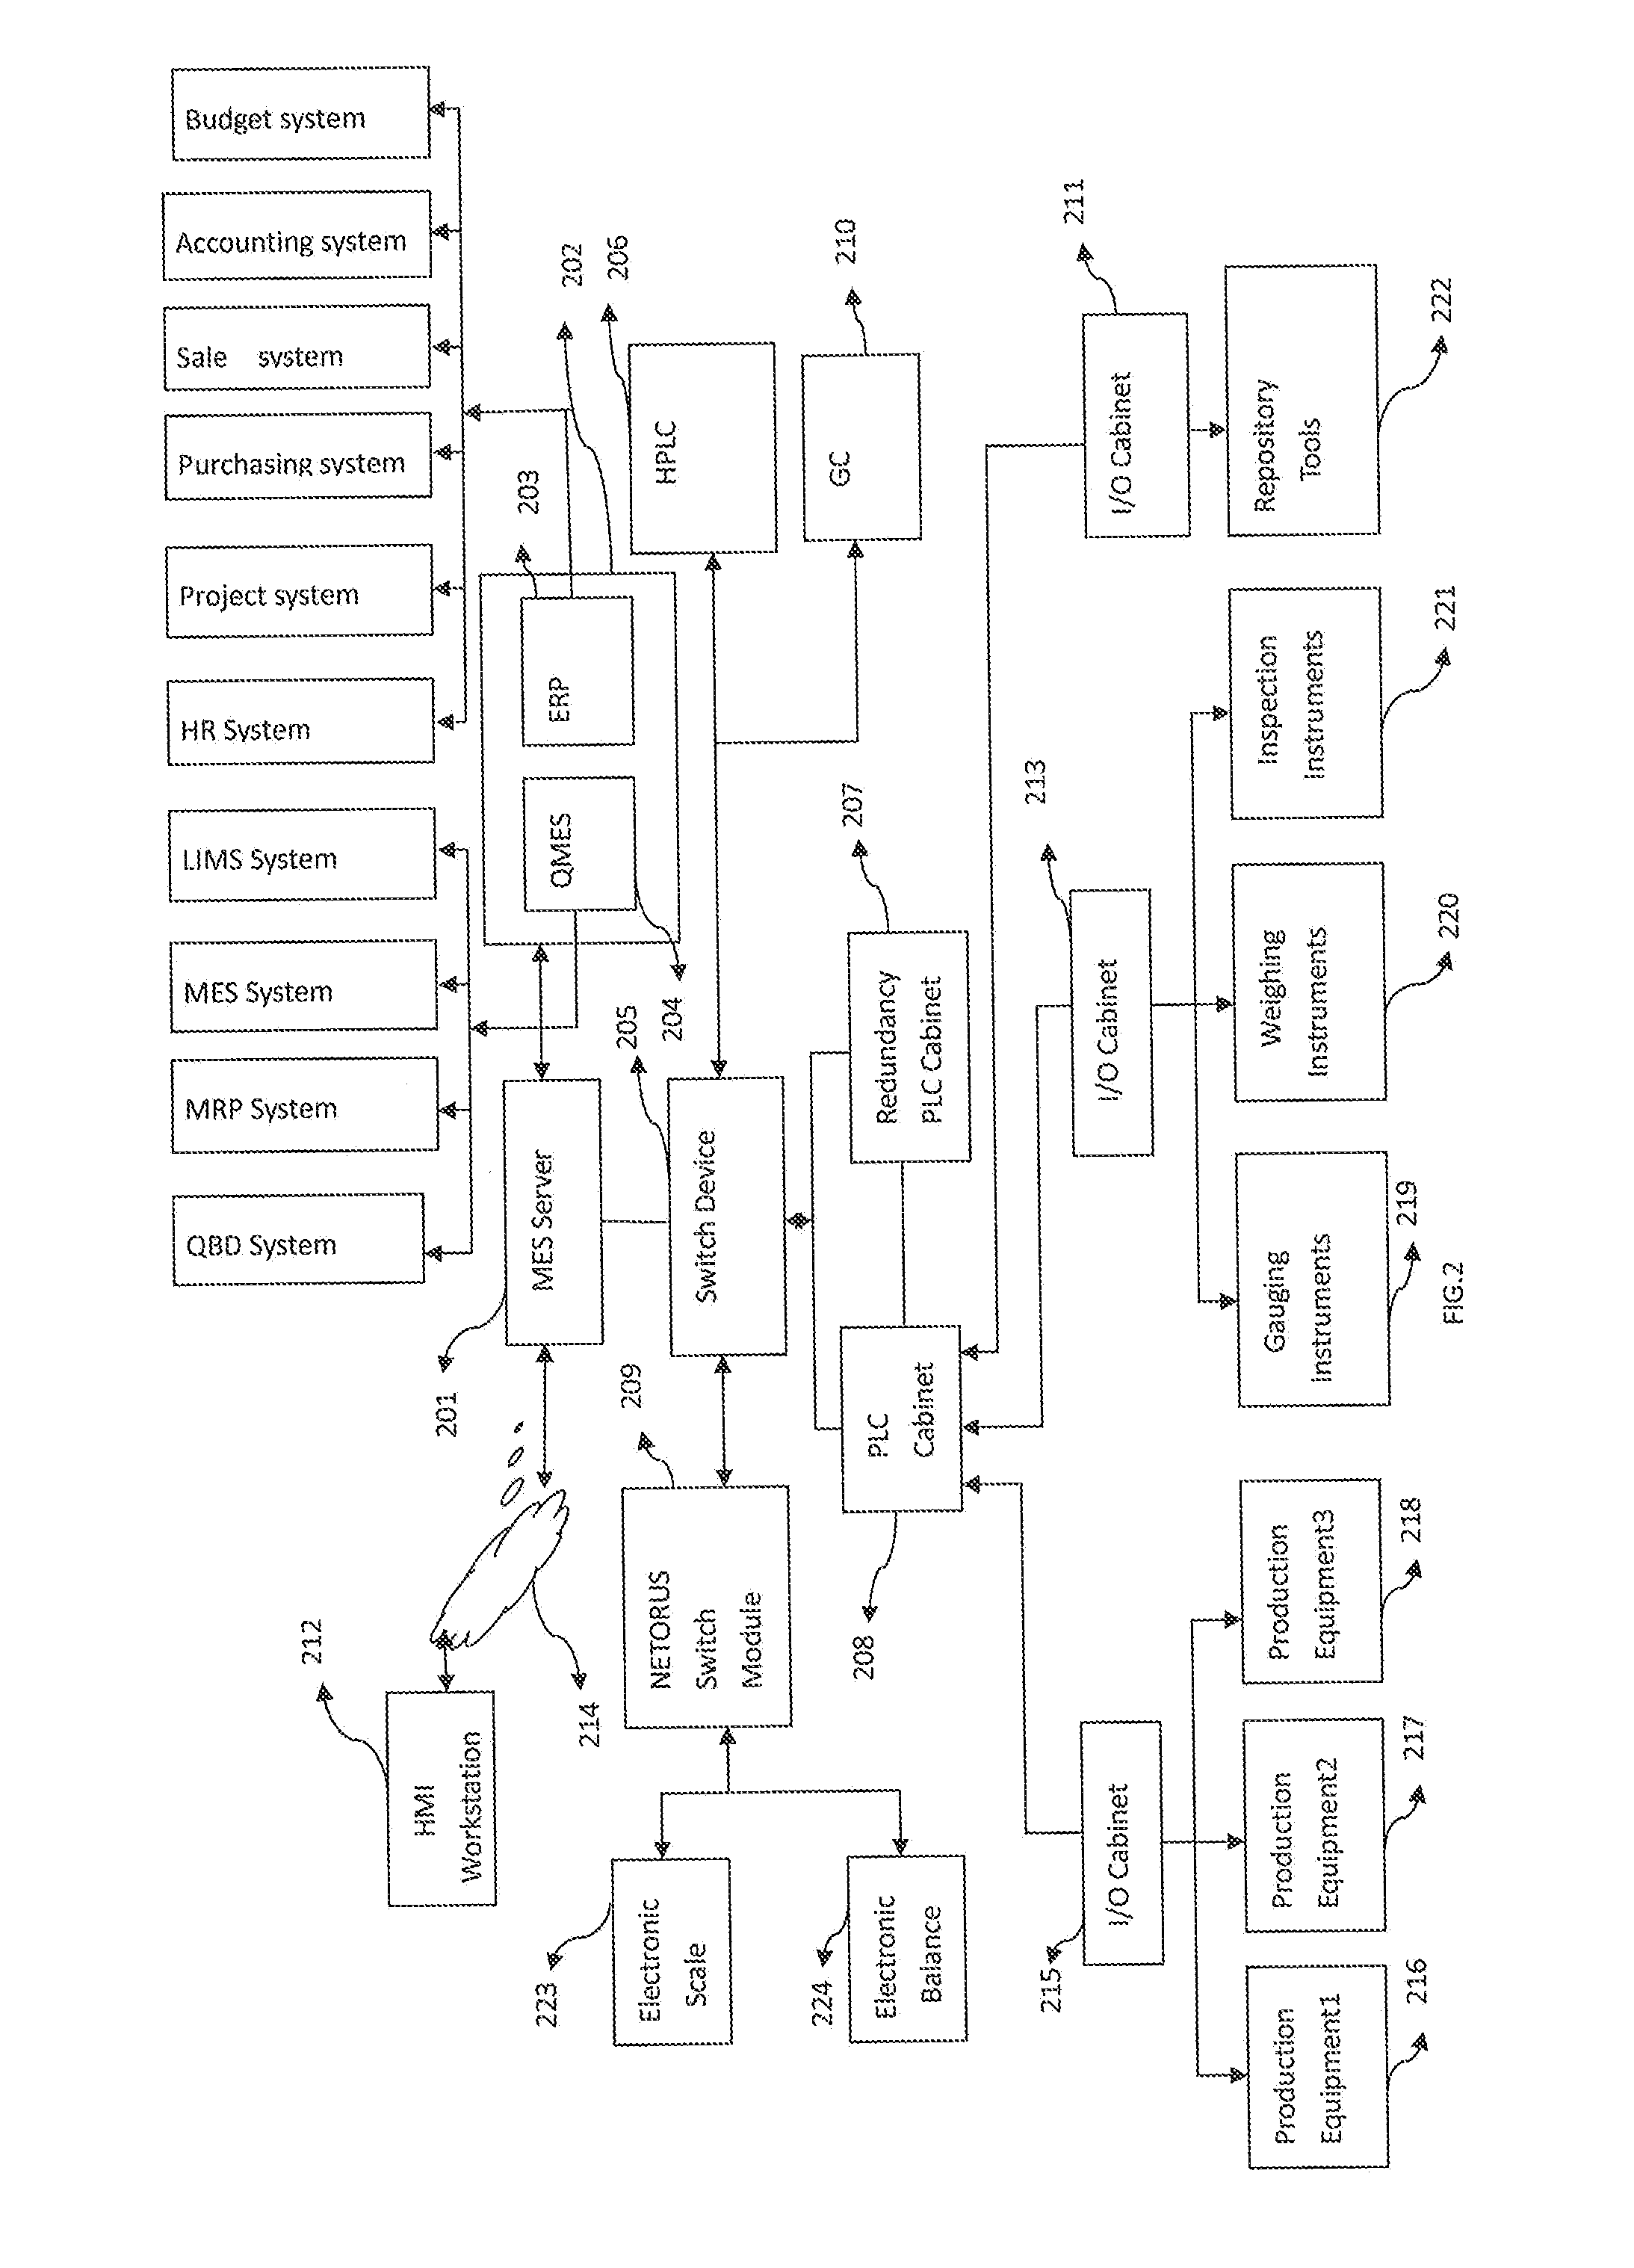 Network-based control method and system for controlling a whole-flow production process